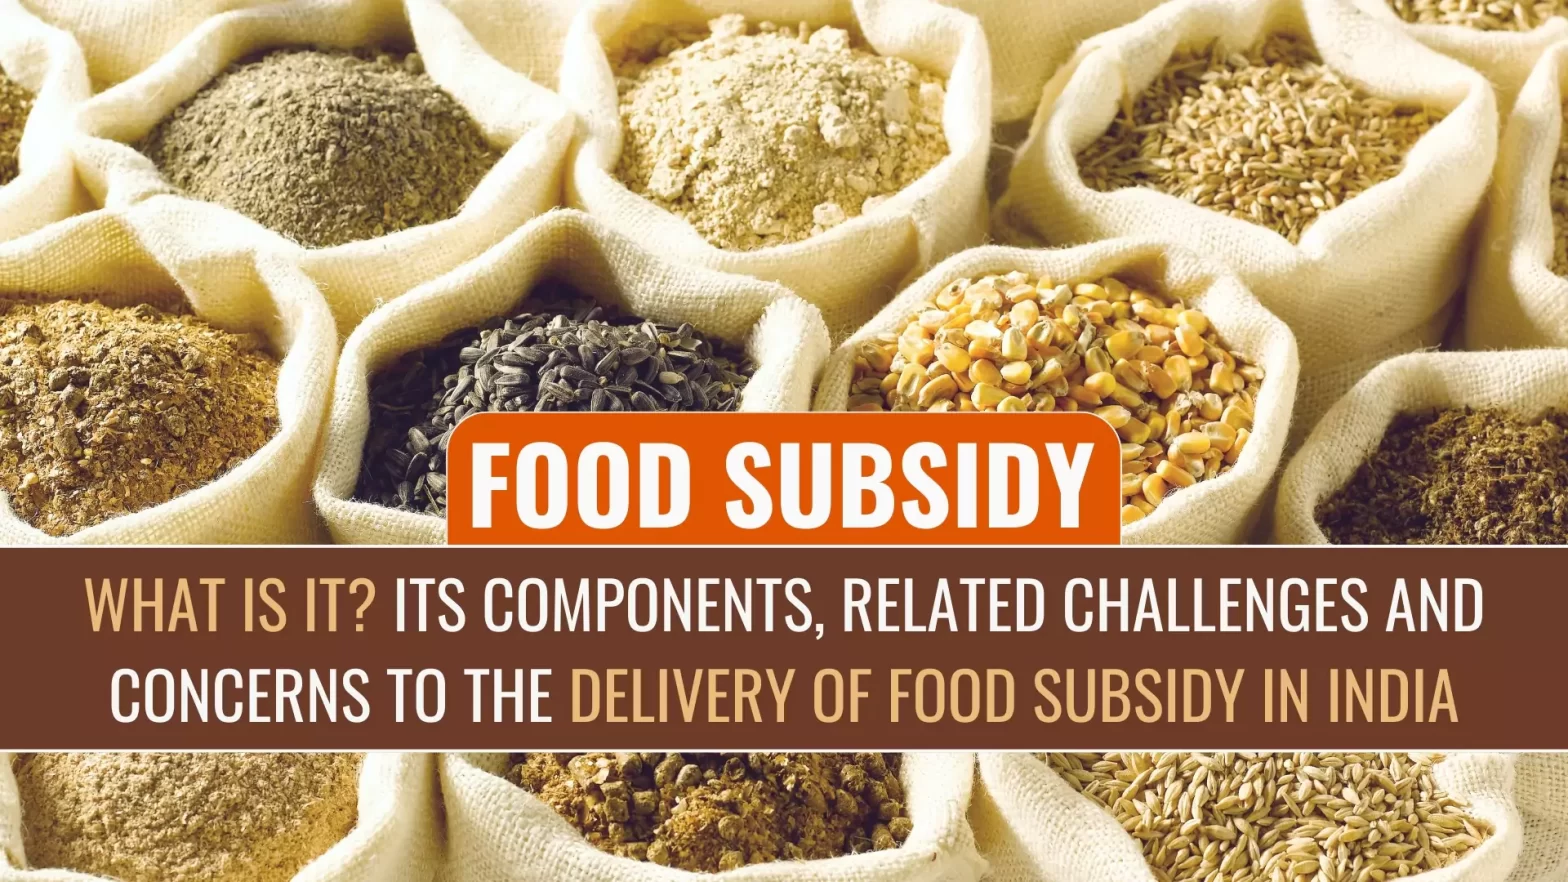 Food Subsidy: What is It?, Its Components, Related Challenges and Concerns to the Delivery of Food Subsidy in India